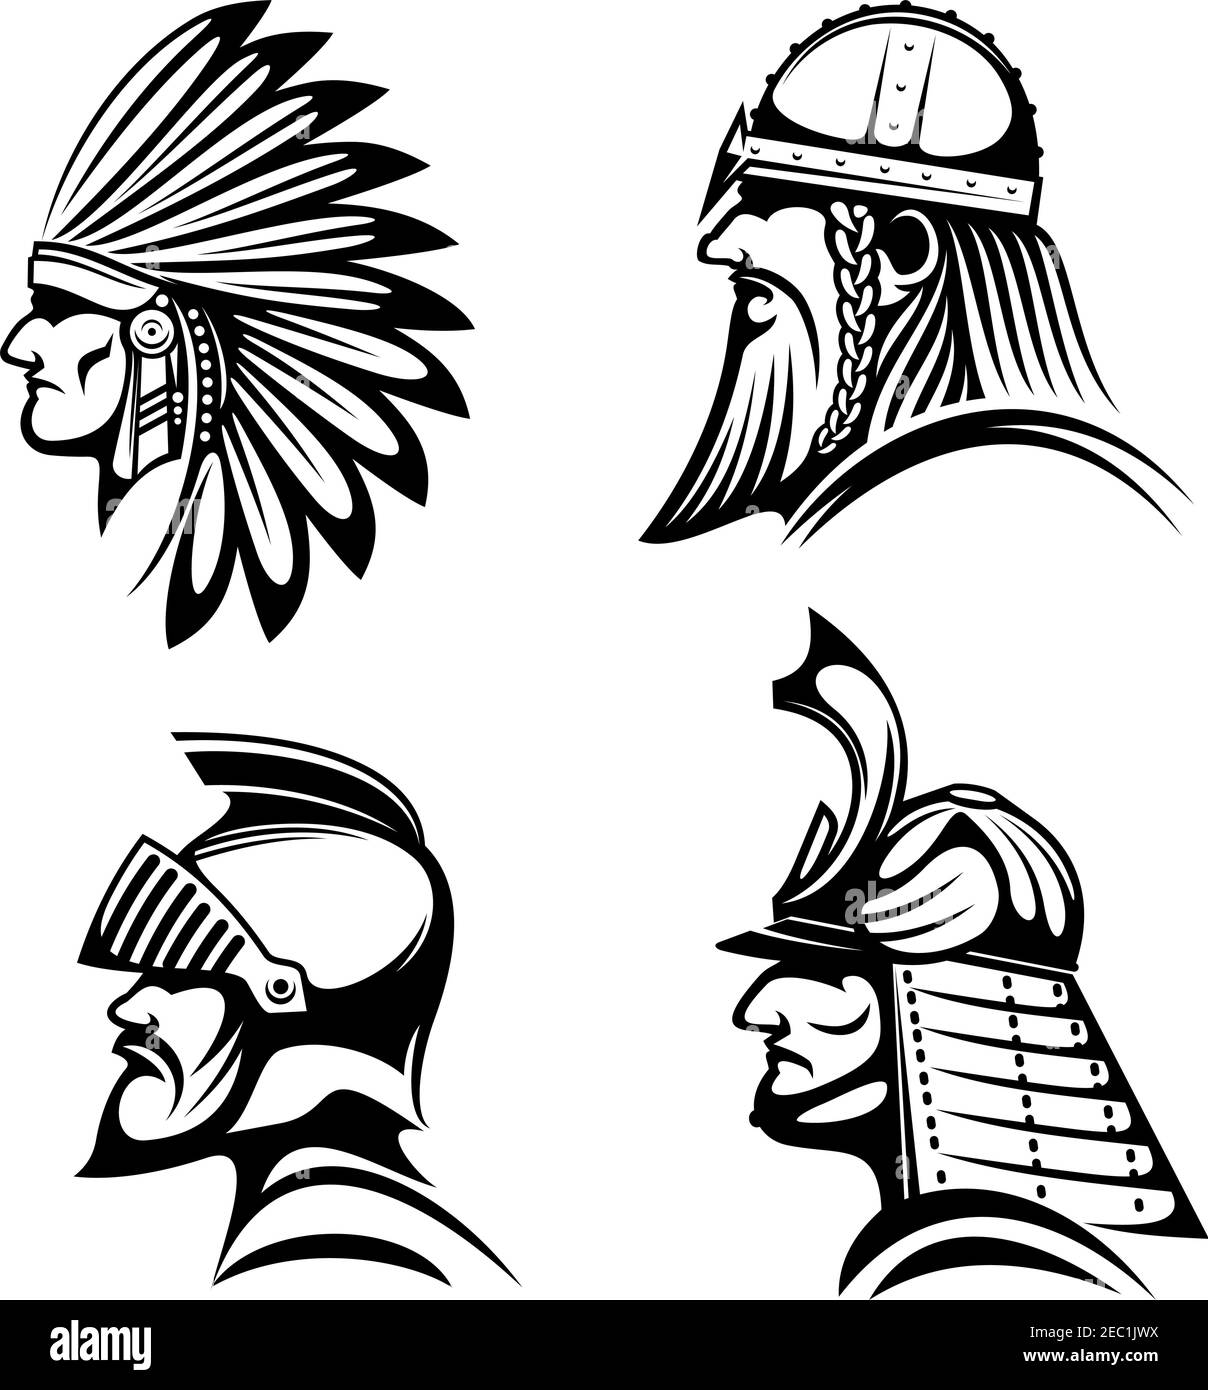 Ancient warriors in helmets icons with profiles of medieval knight, bearded viking soldier, japanese samurai and native american indian in feather hea Stock Vector